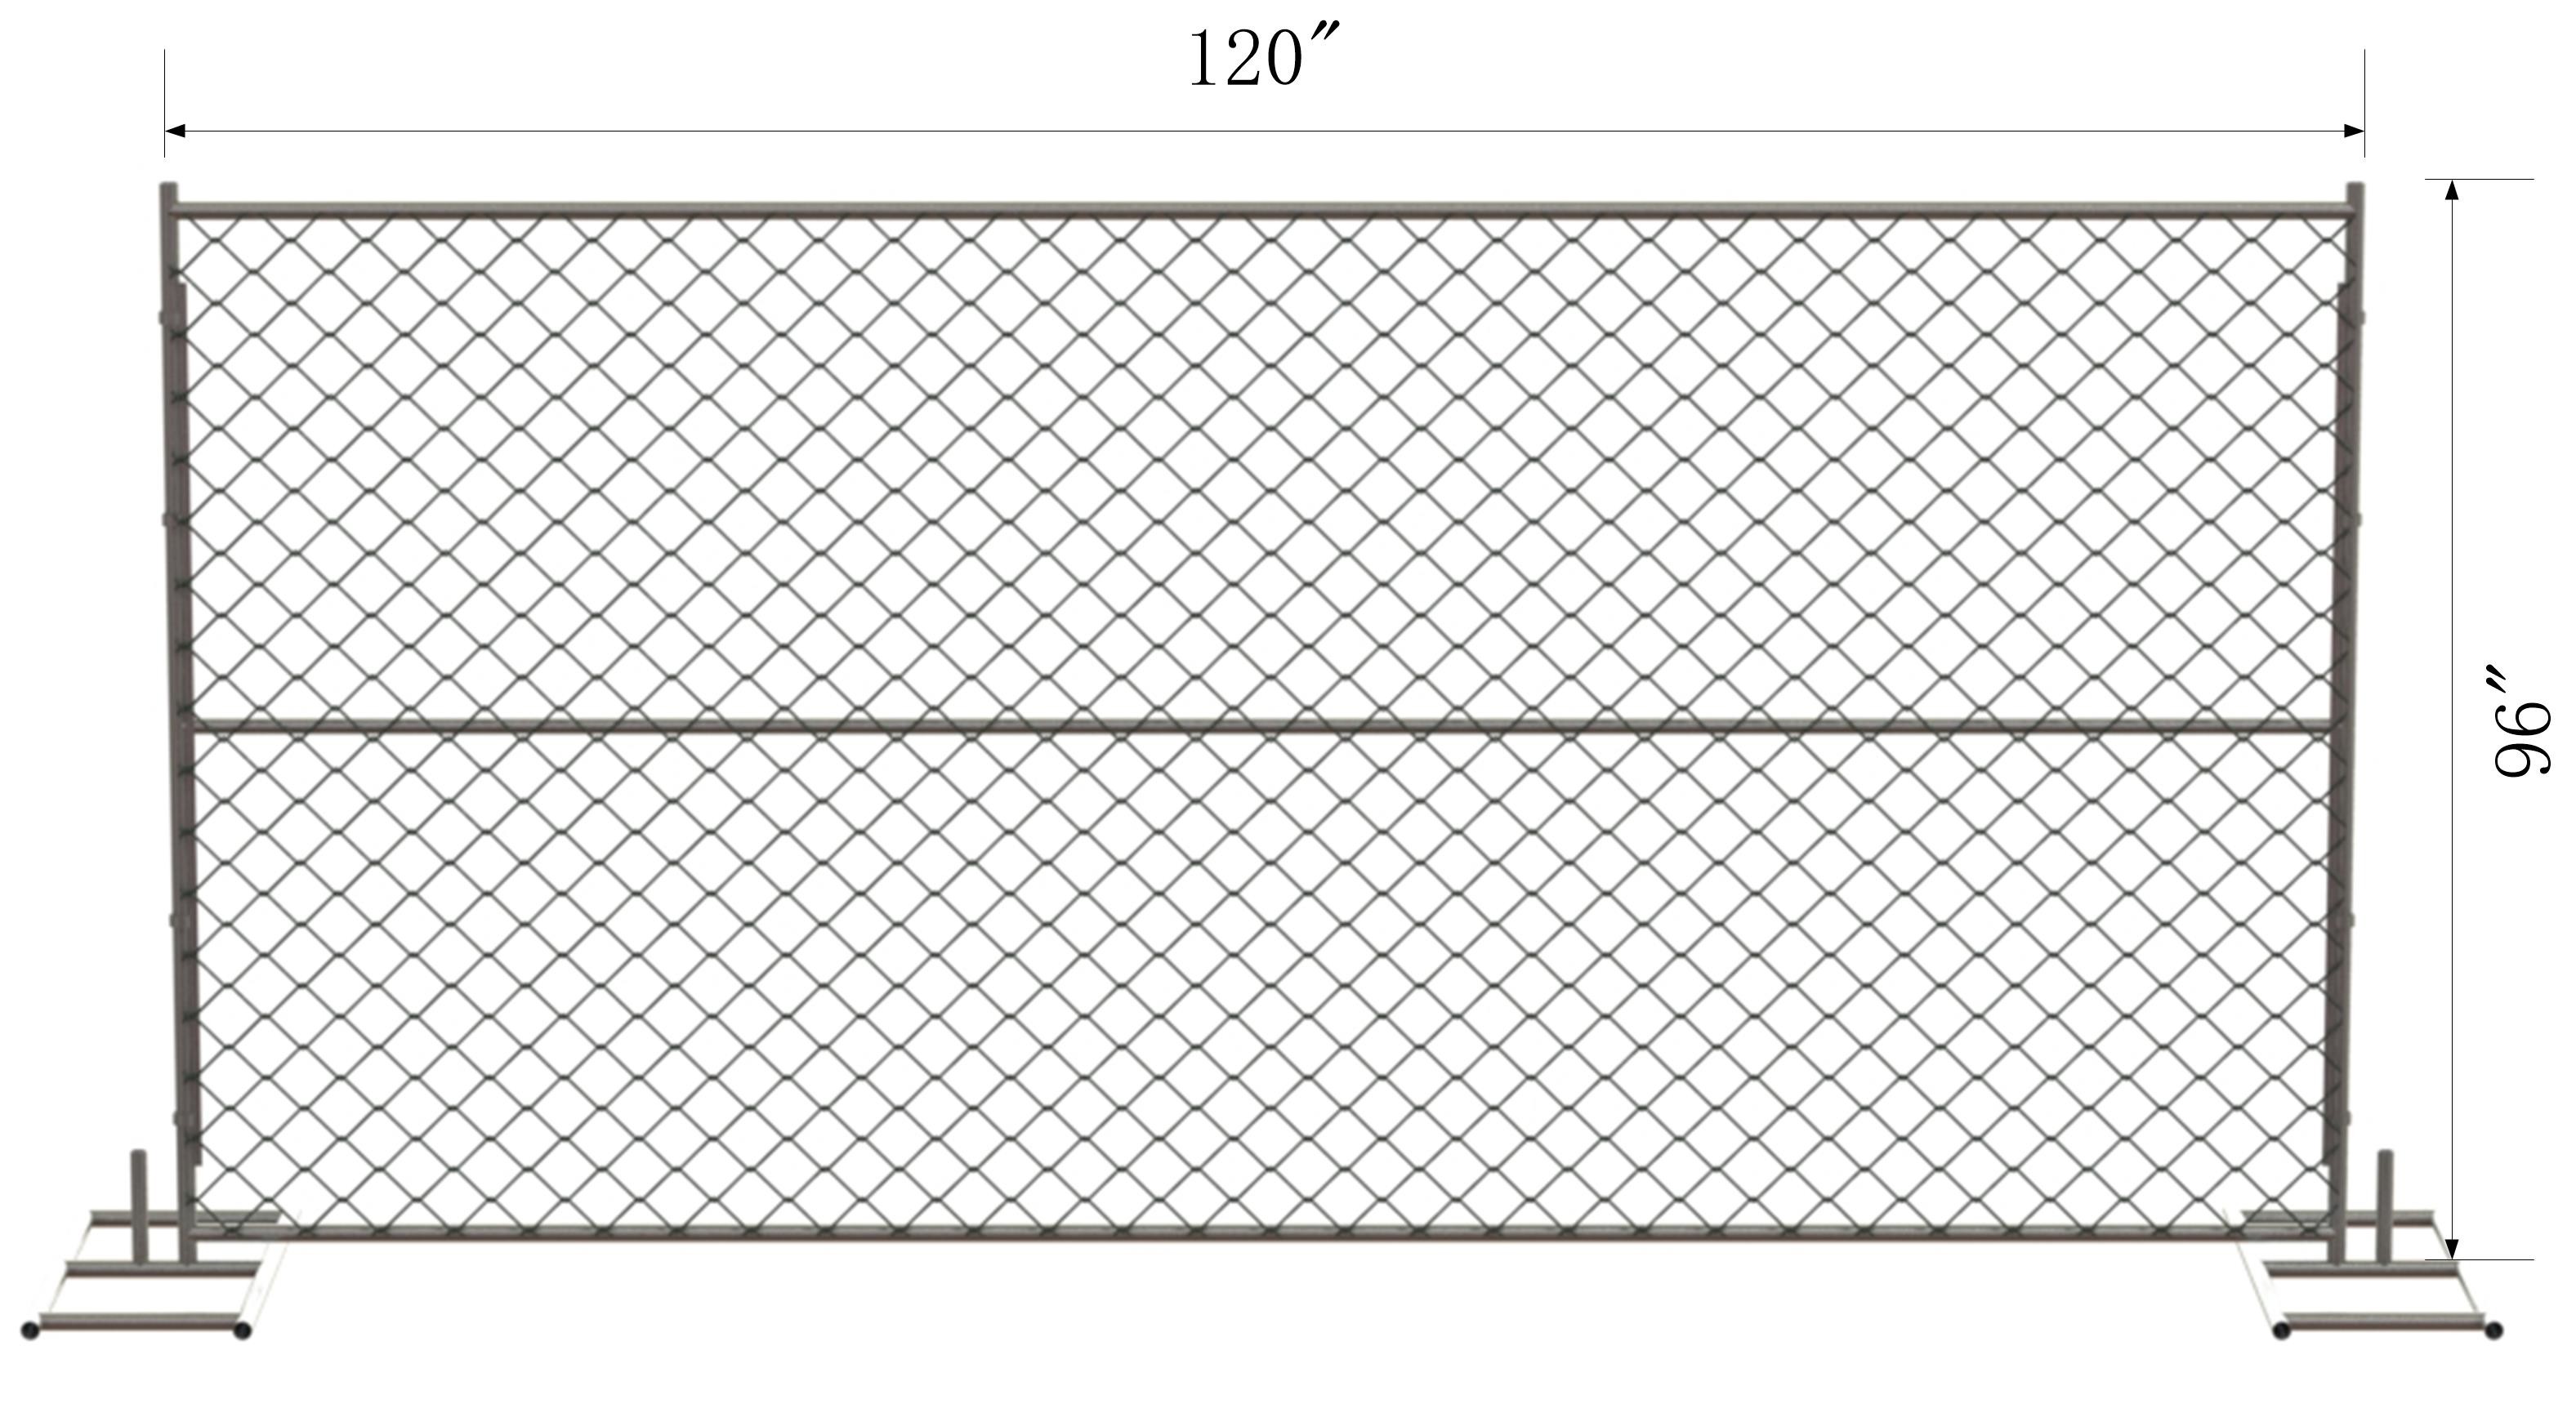 6x10 chain link fence panels